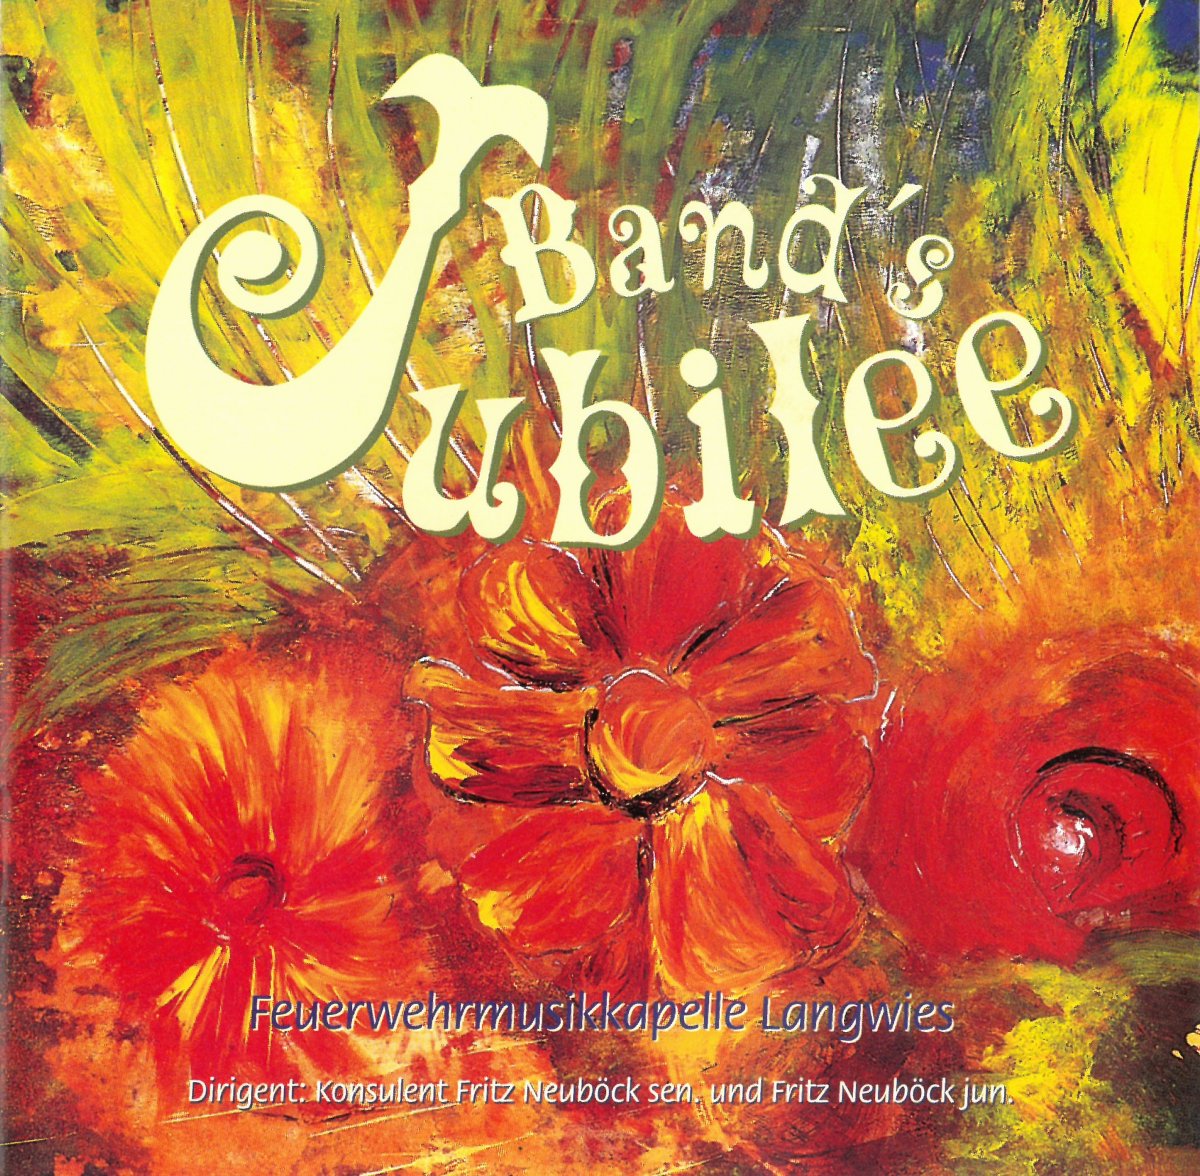 Band's Jubilee - click here